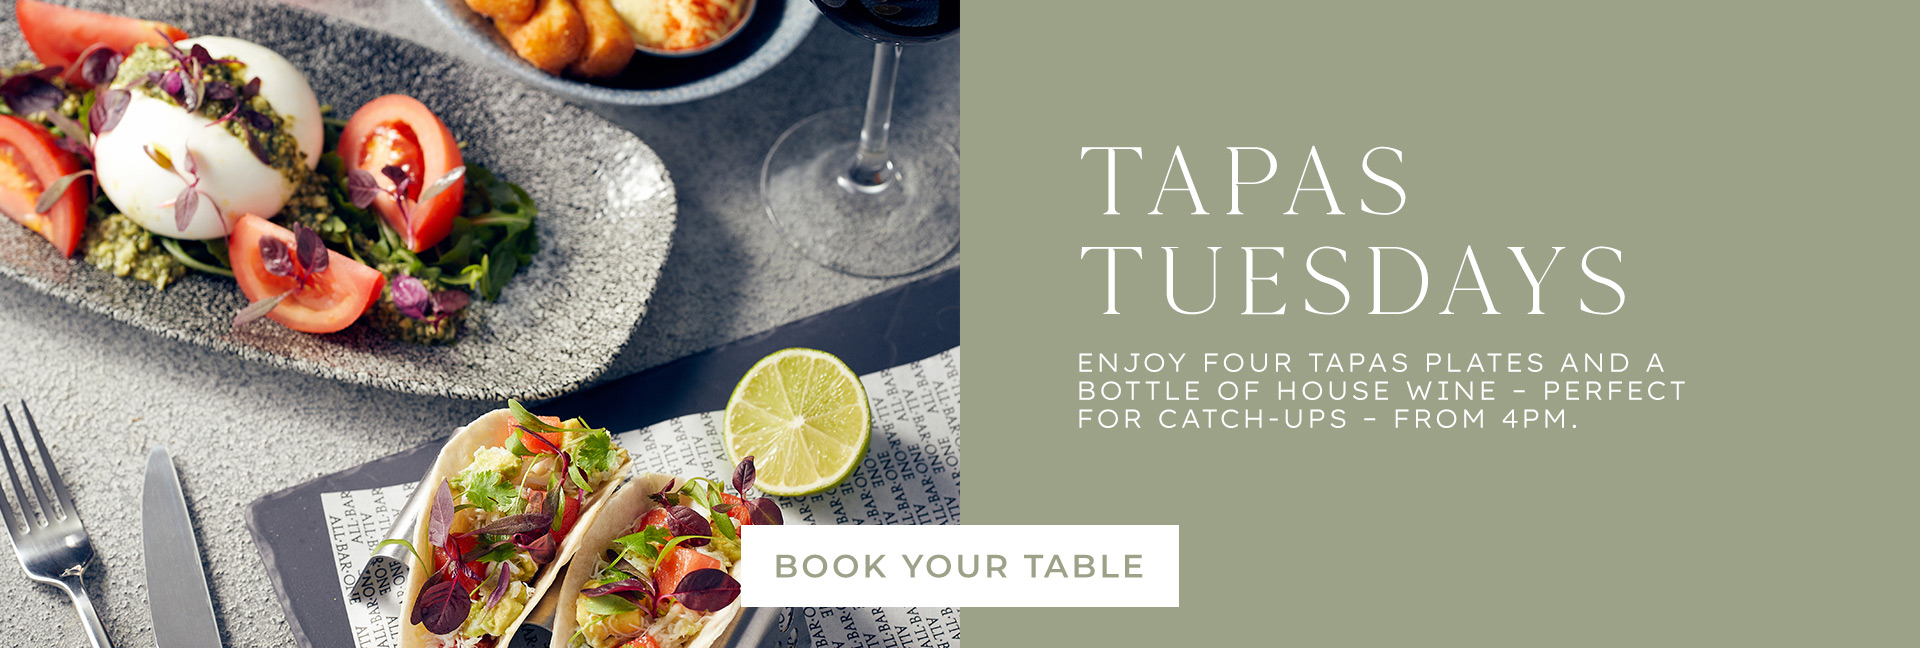 Tapas Tuesday at All Bar One Victoria - Book now